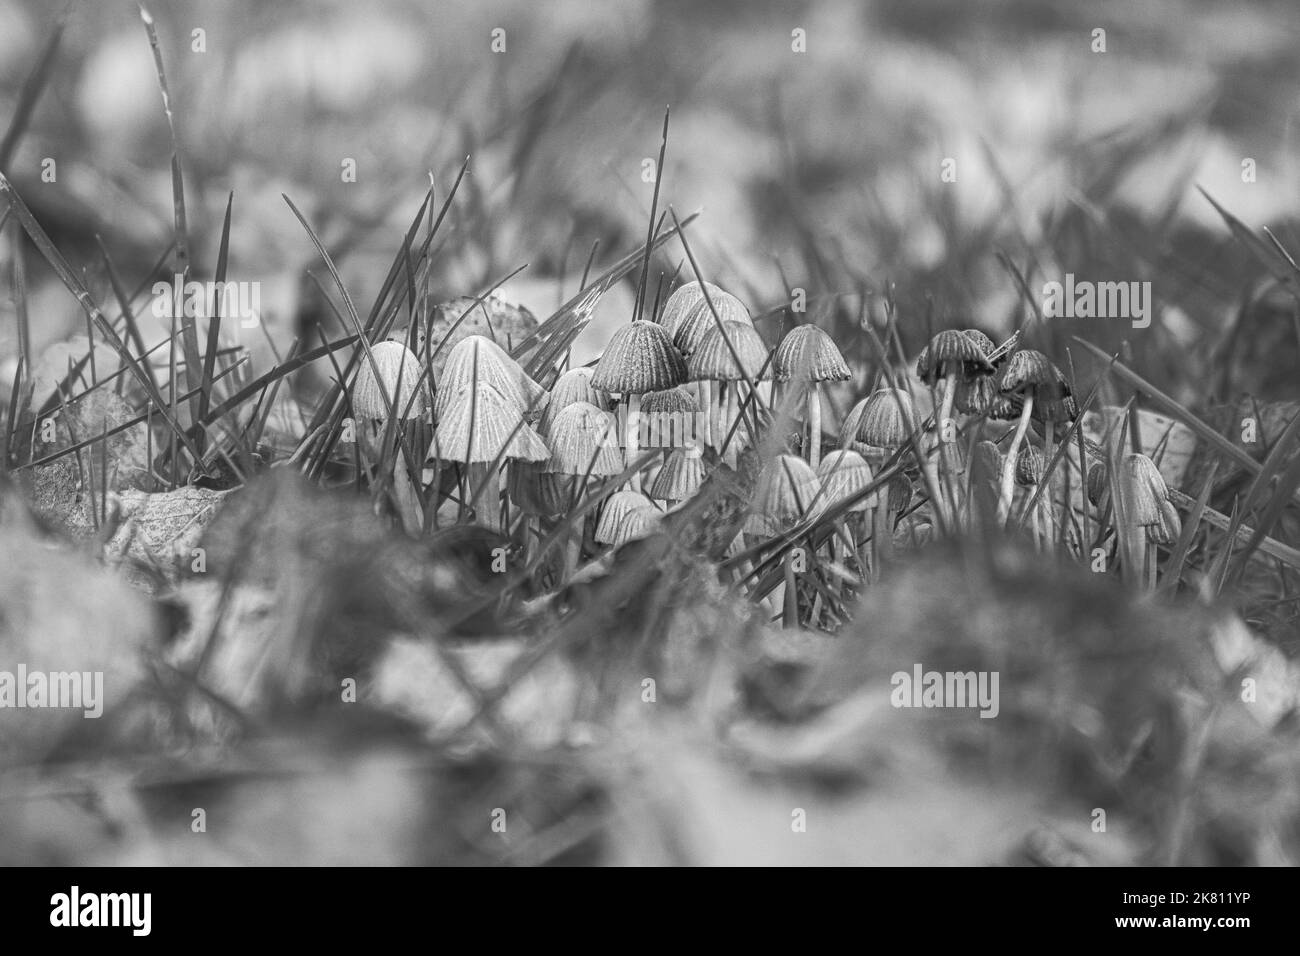 A group of filigree small mushrooms, taken in black and white, on the forest floor in soft light. Macro shot from nature Stock Photo